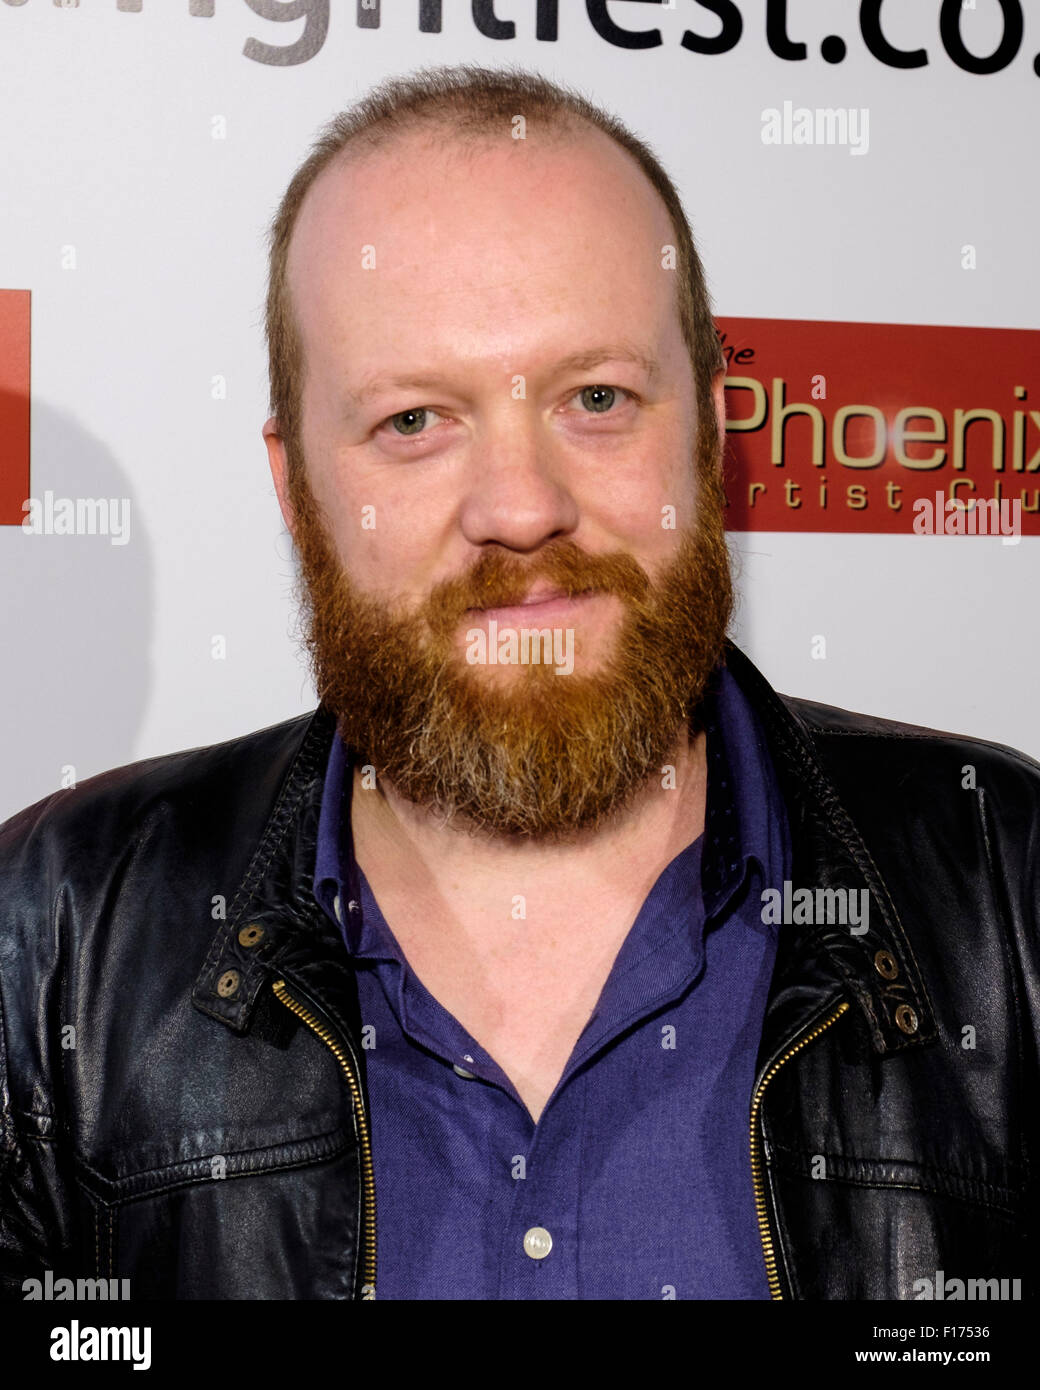 Steve Oram attends the Frightfest 2015 on 28/08/2015 at The VUE West End, London. Steve was attending the World Premiere of Aaaaaaaah!. Picture by Julie Edwards Stock Photo